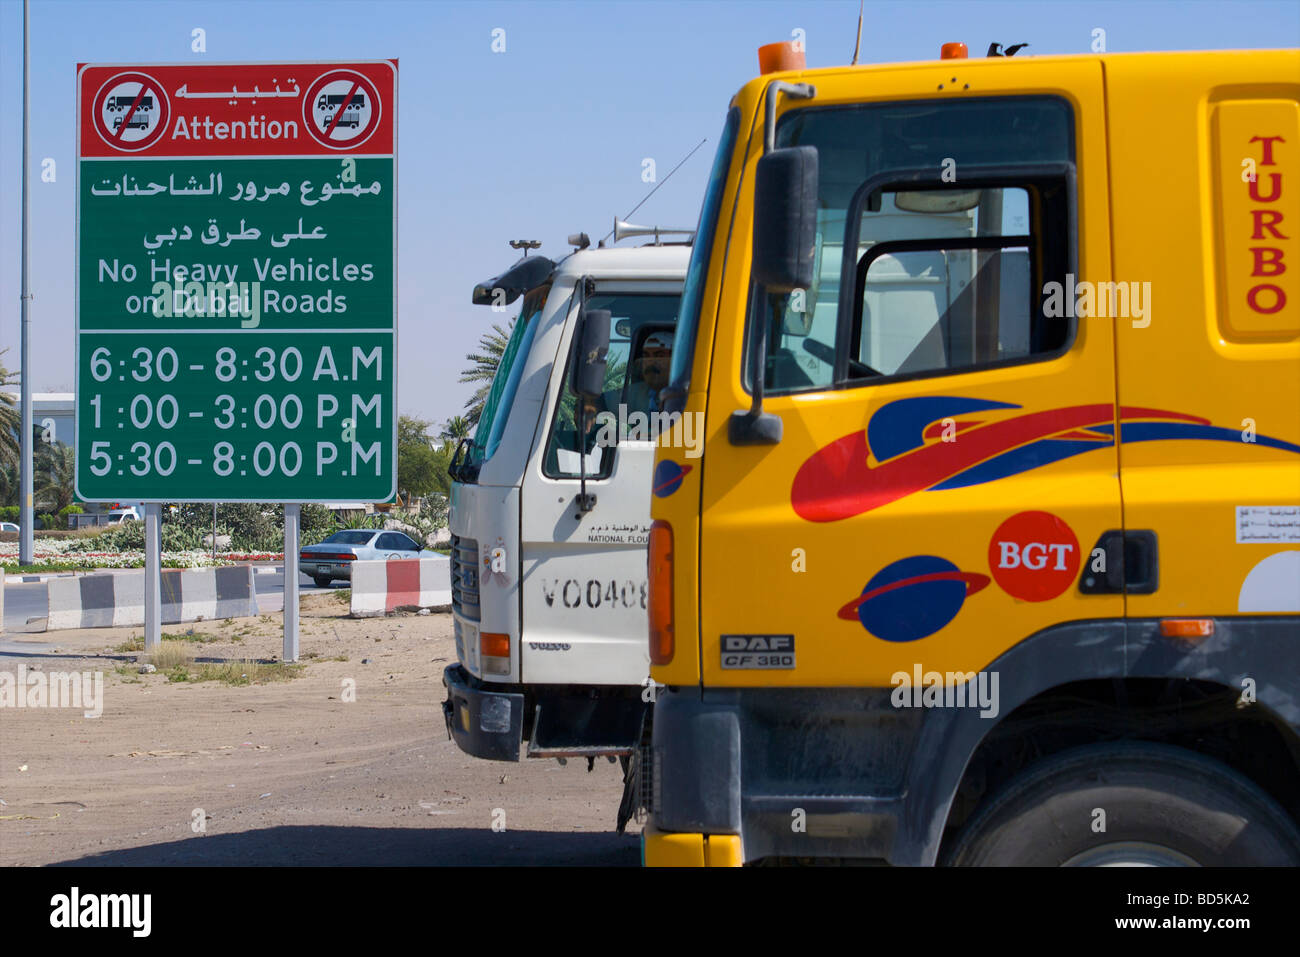 Trucks waiting because they are prohibited from using the streets during certain hours each day in Dubai, United Arab Emirates Stock Photo